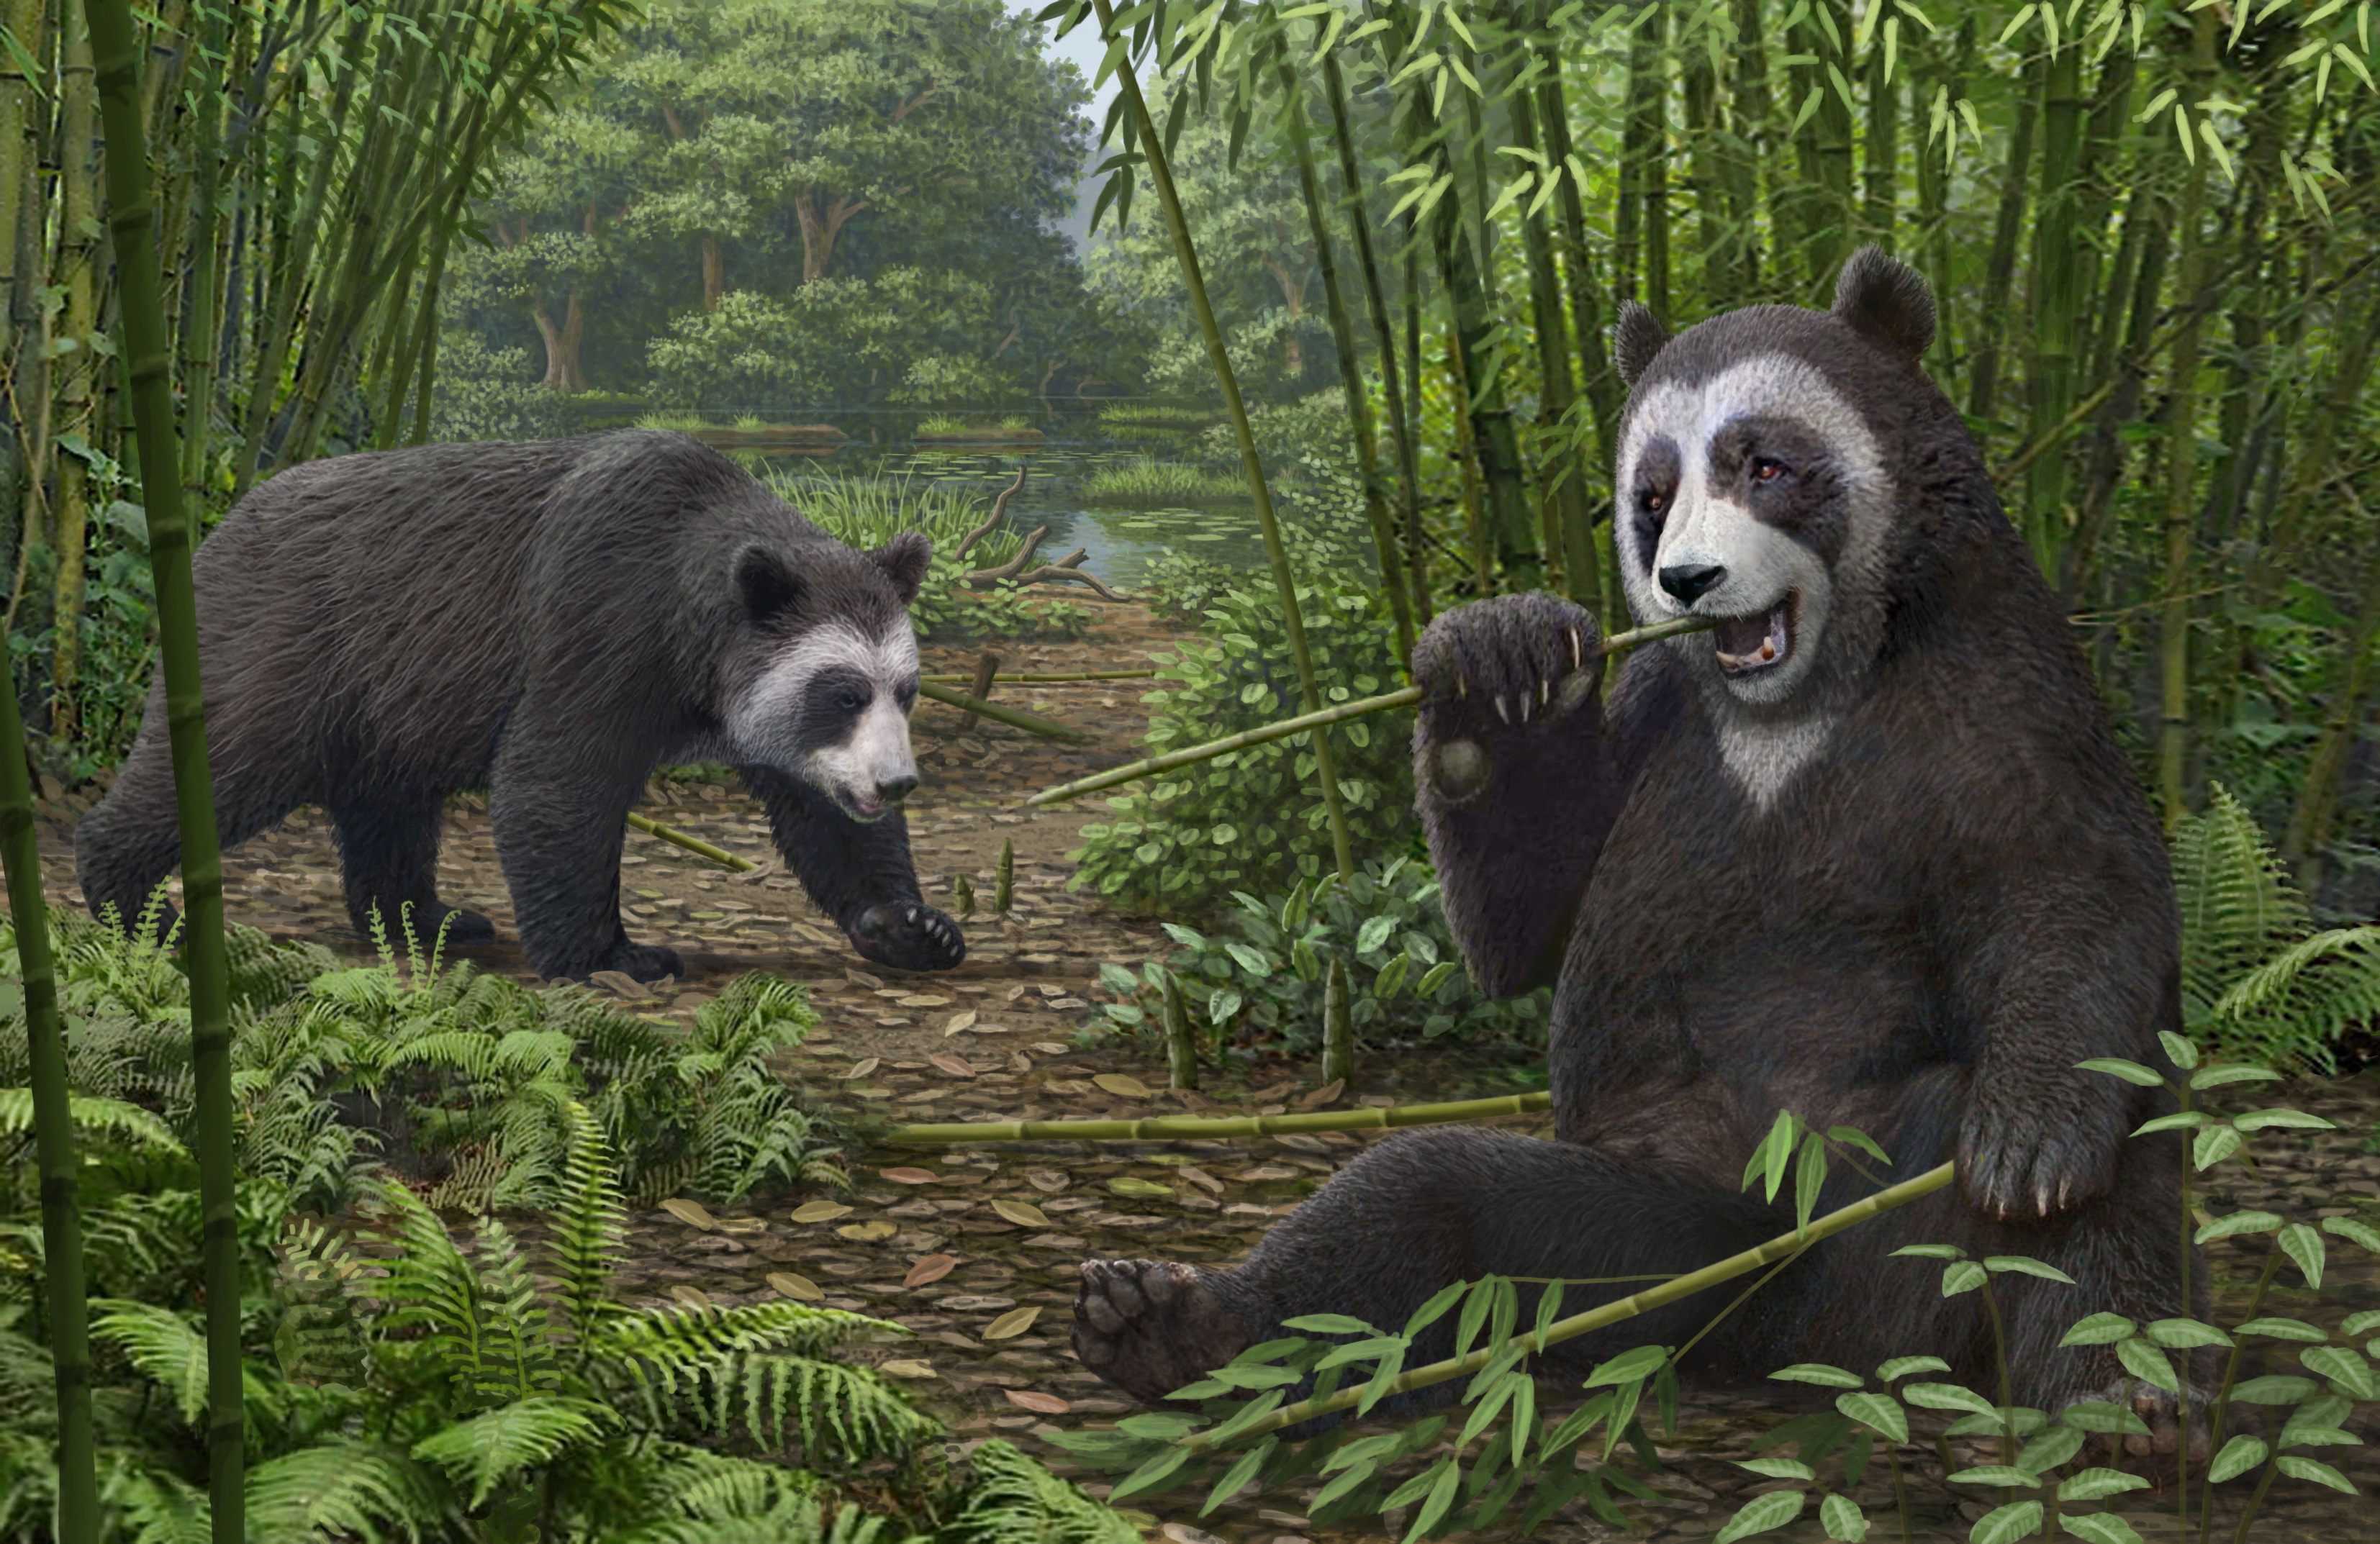 These giant 'drop bears' with opposable thumbs once scaled trees